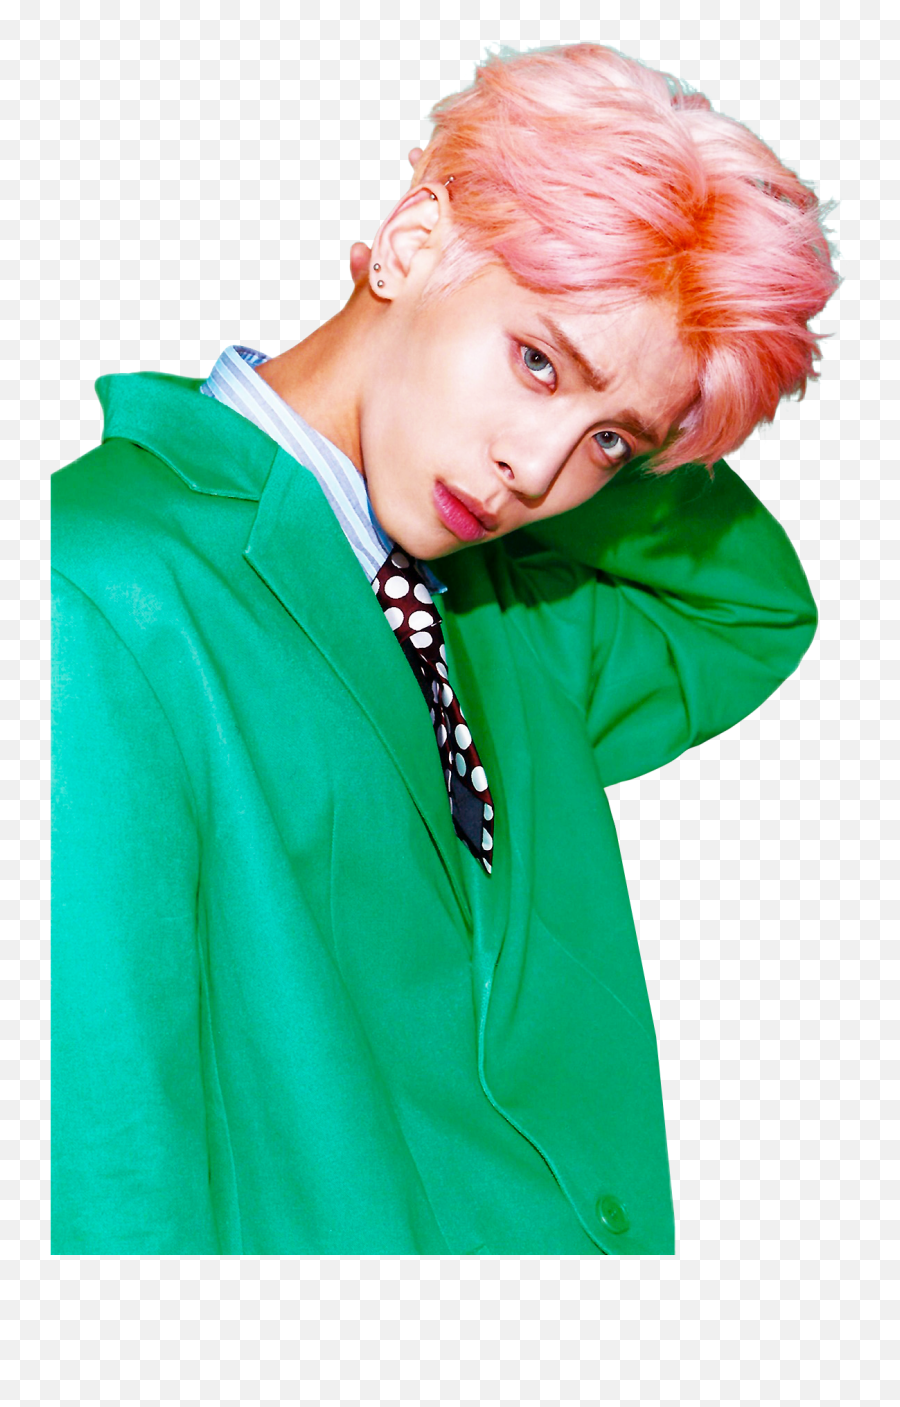 The Most Edited Shineejonghyun Picsart Png Rp Icon Red Hair